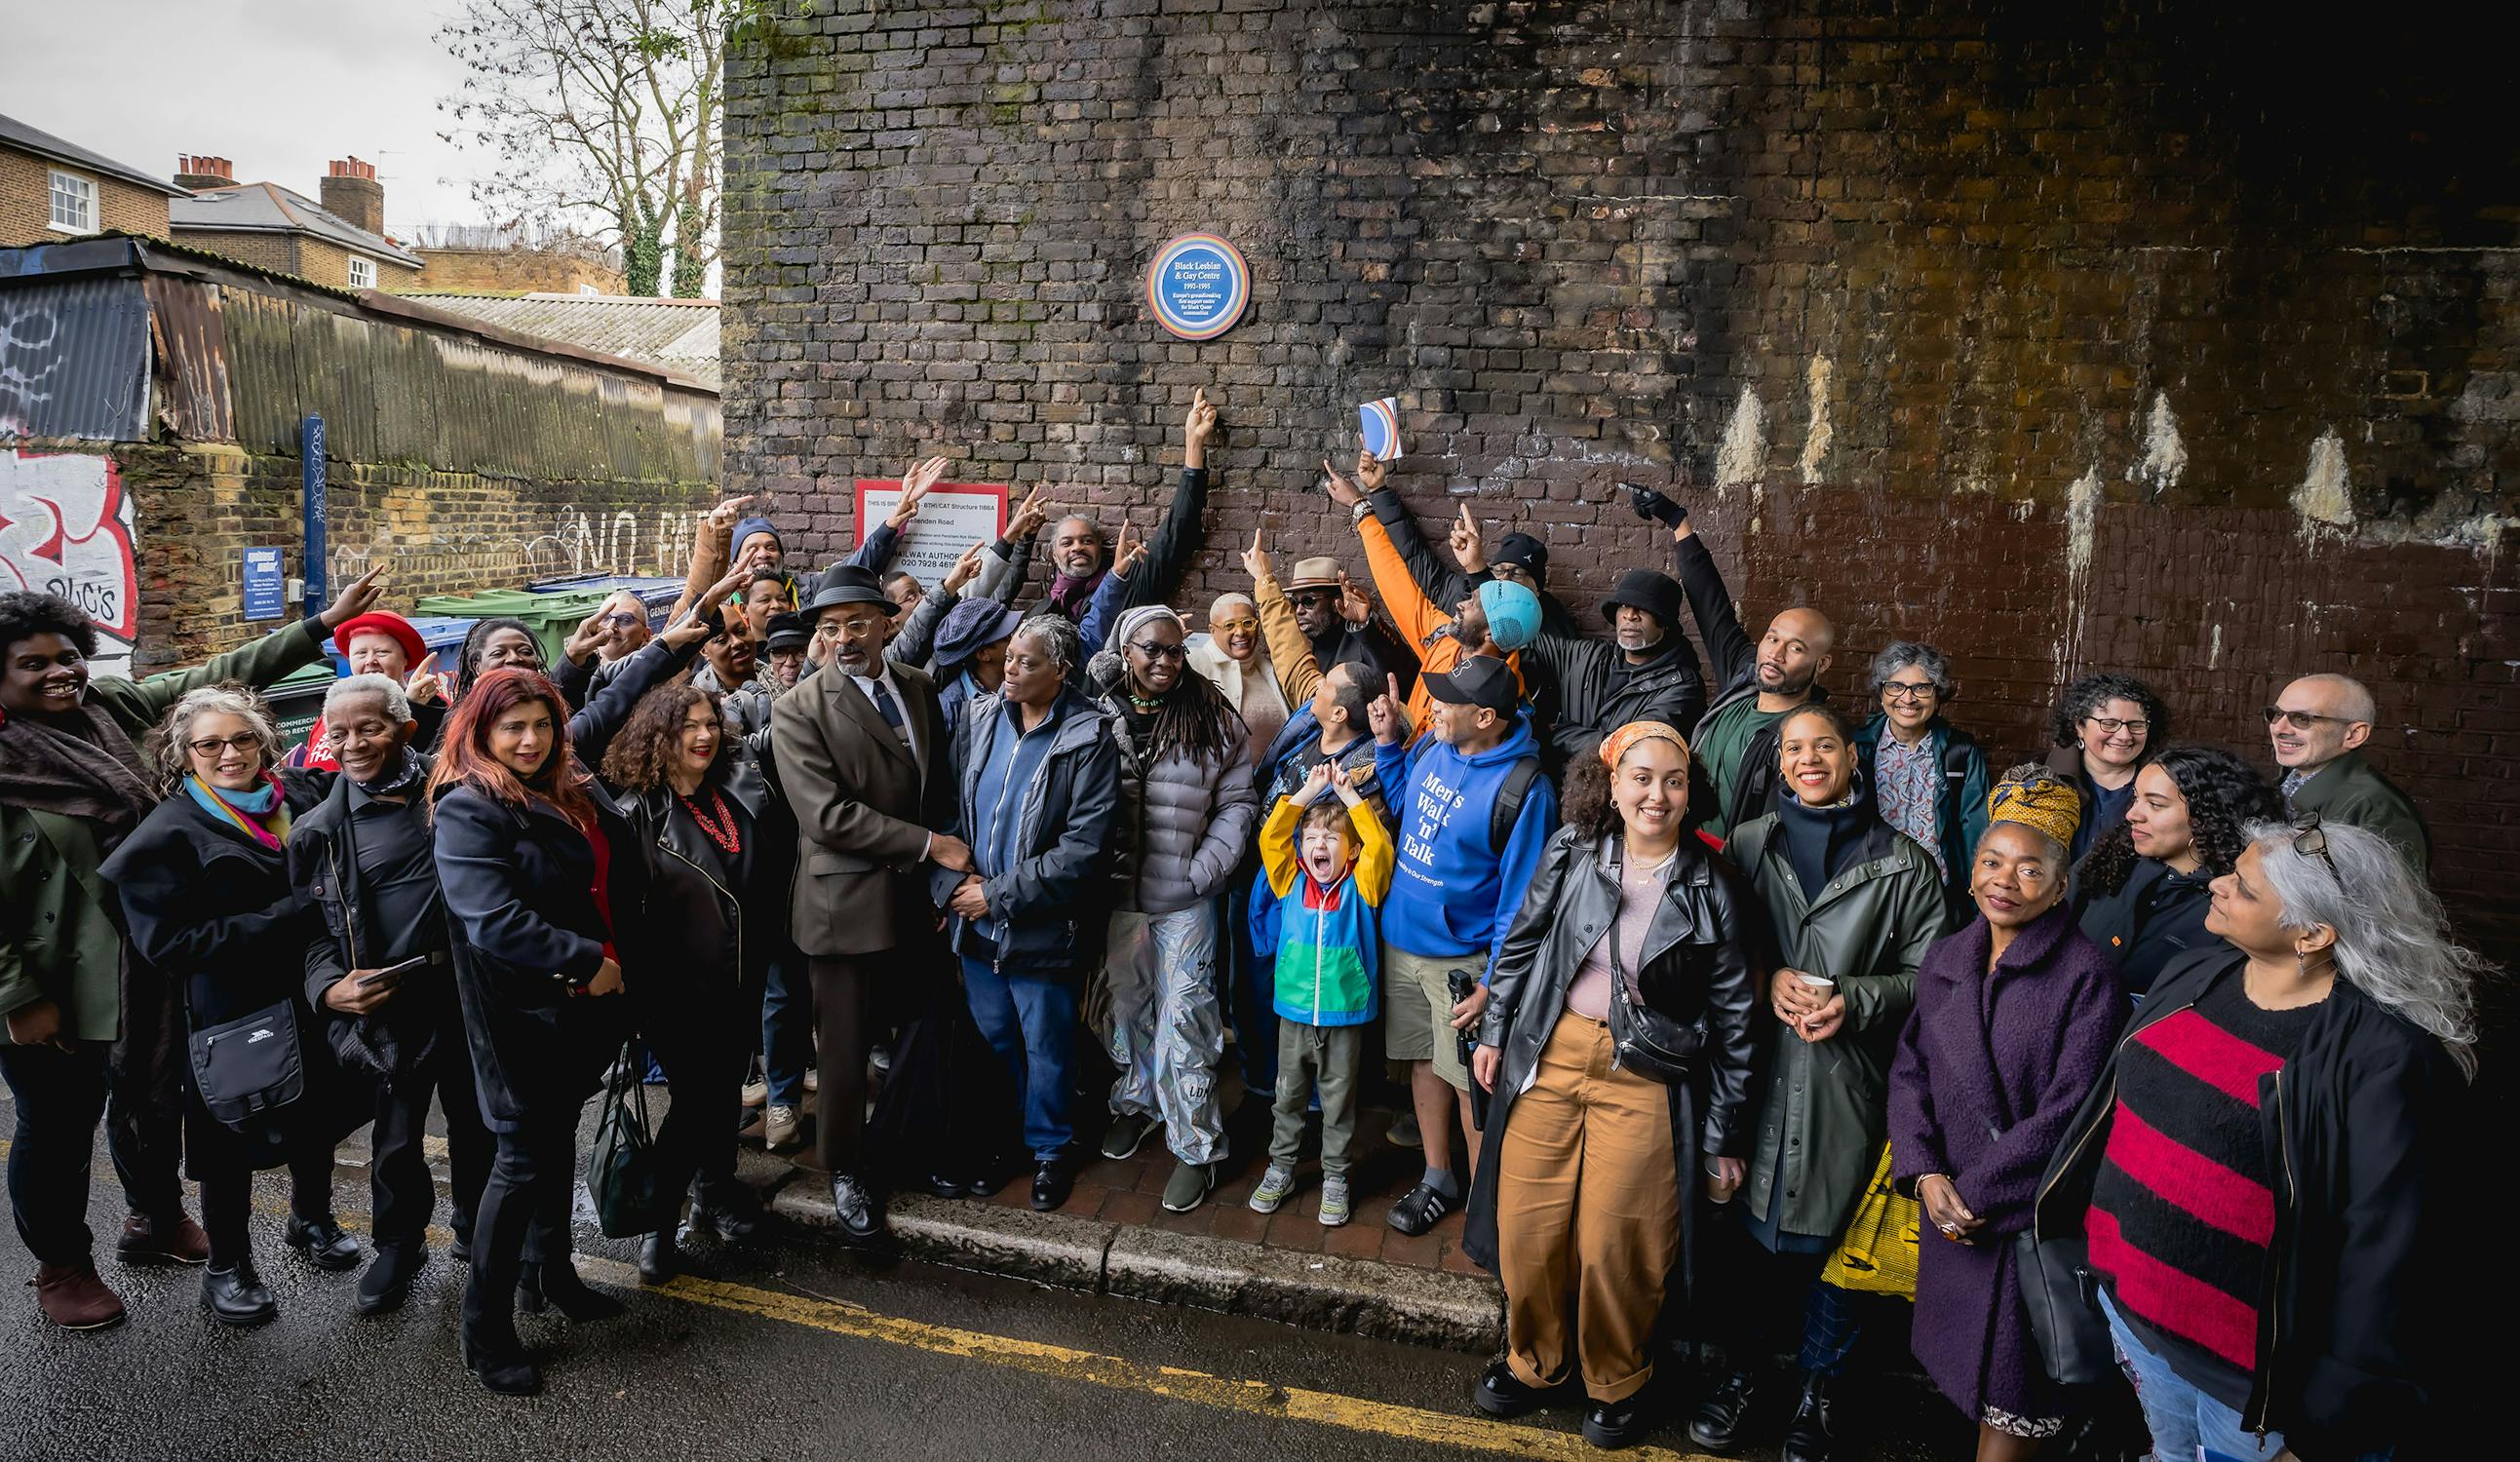 a photograph of a crowd of people of varying ages at the Rainbow Plaque unveiling. The crowd are pointing at a circular wall plaque mounted on a brick wall.